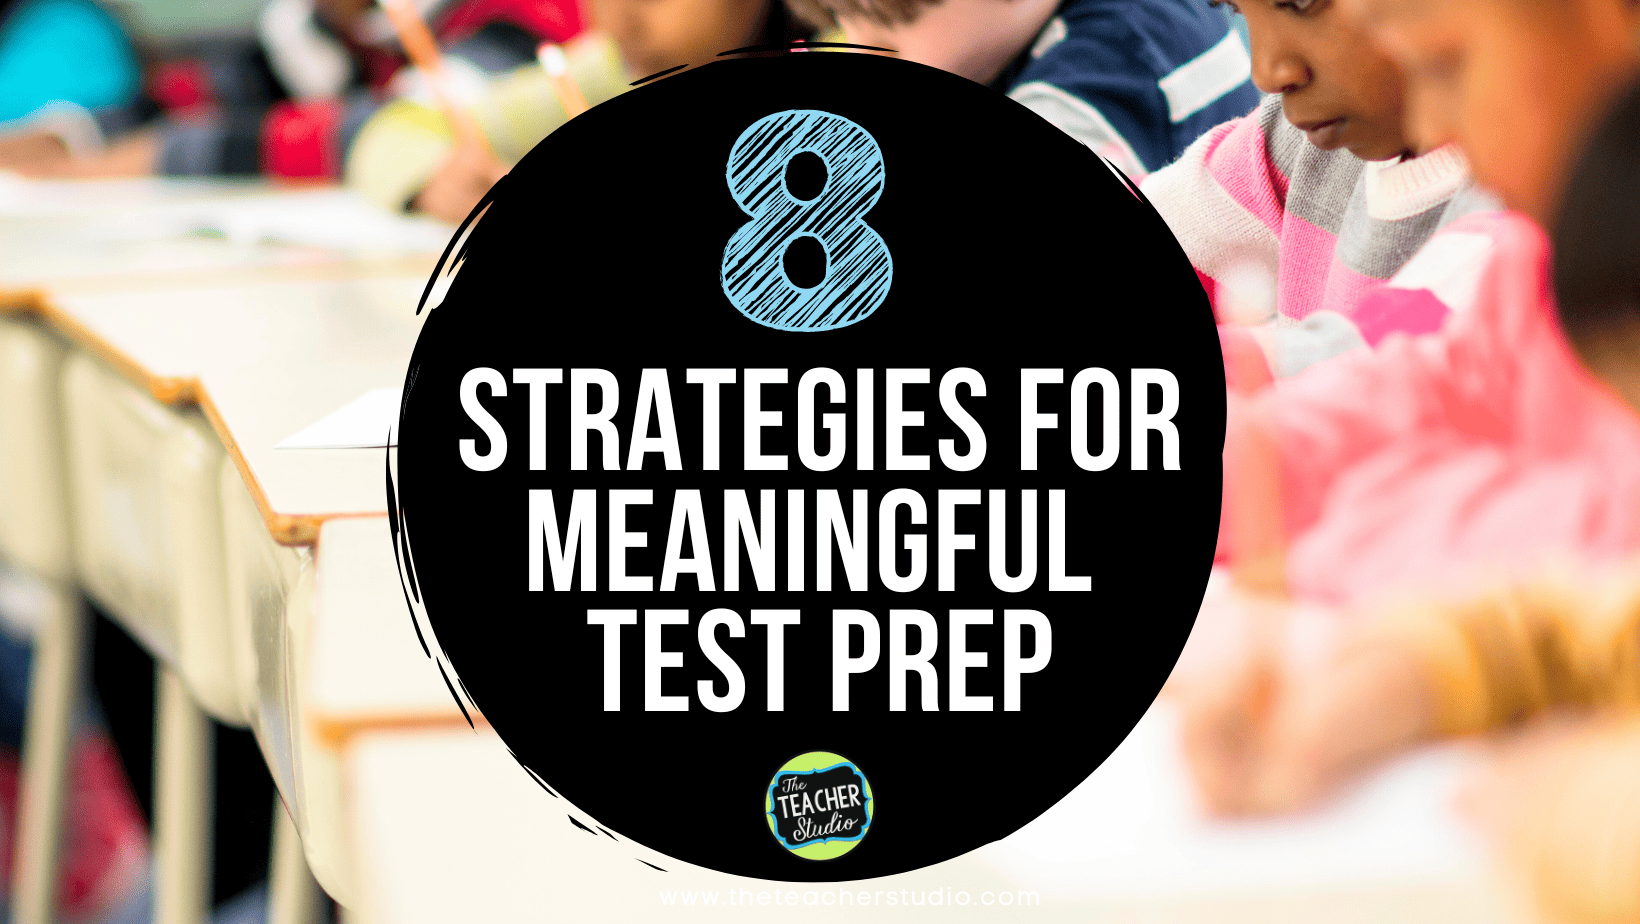 8 Strategies for meaningful test prep